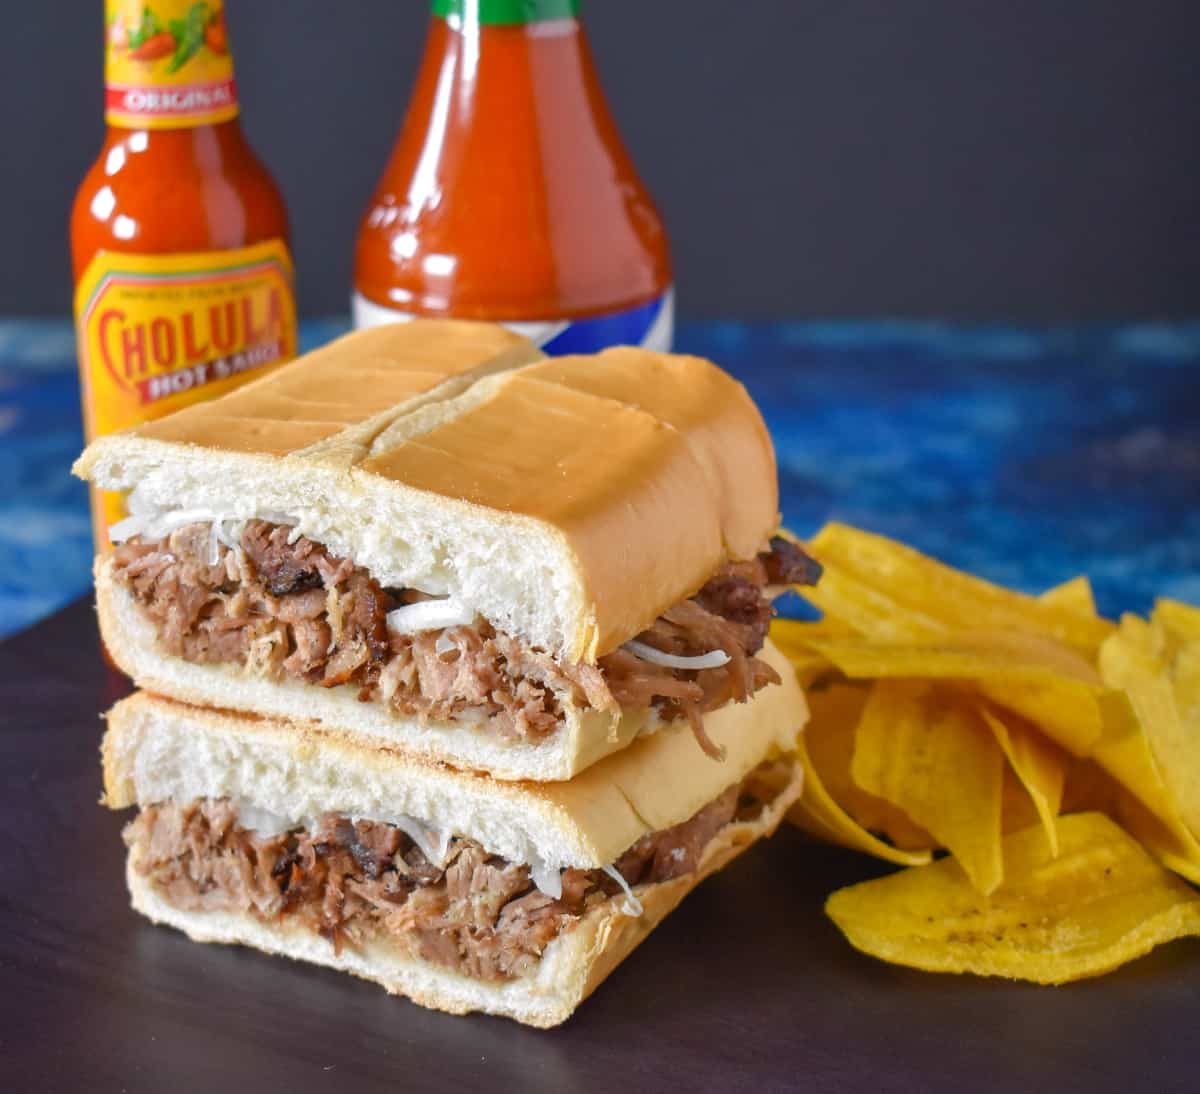 The pan con lechon cut in half and stacked with two bottles of hot sauce and plantain chips in the background, all displayed on a brown cutting board on a blue table.